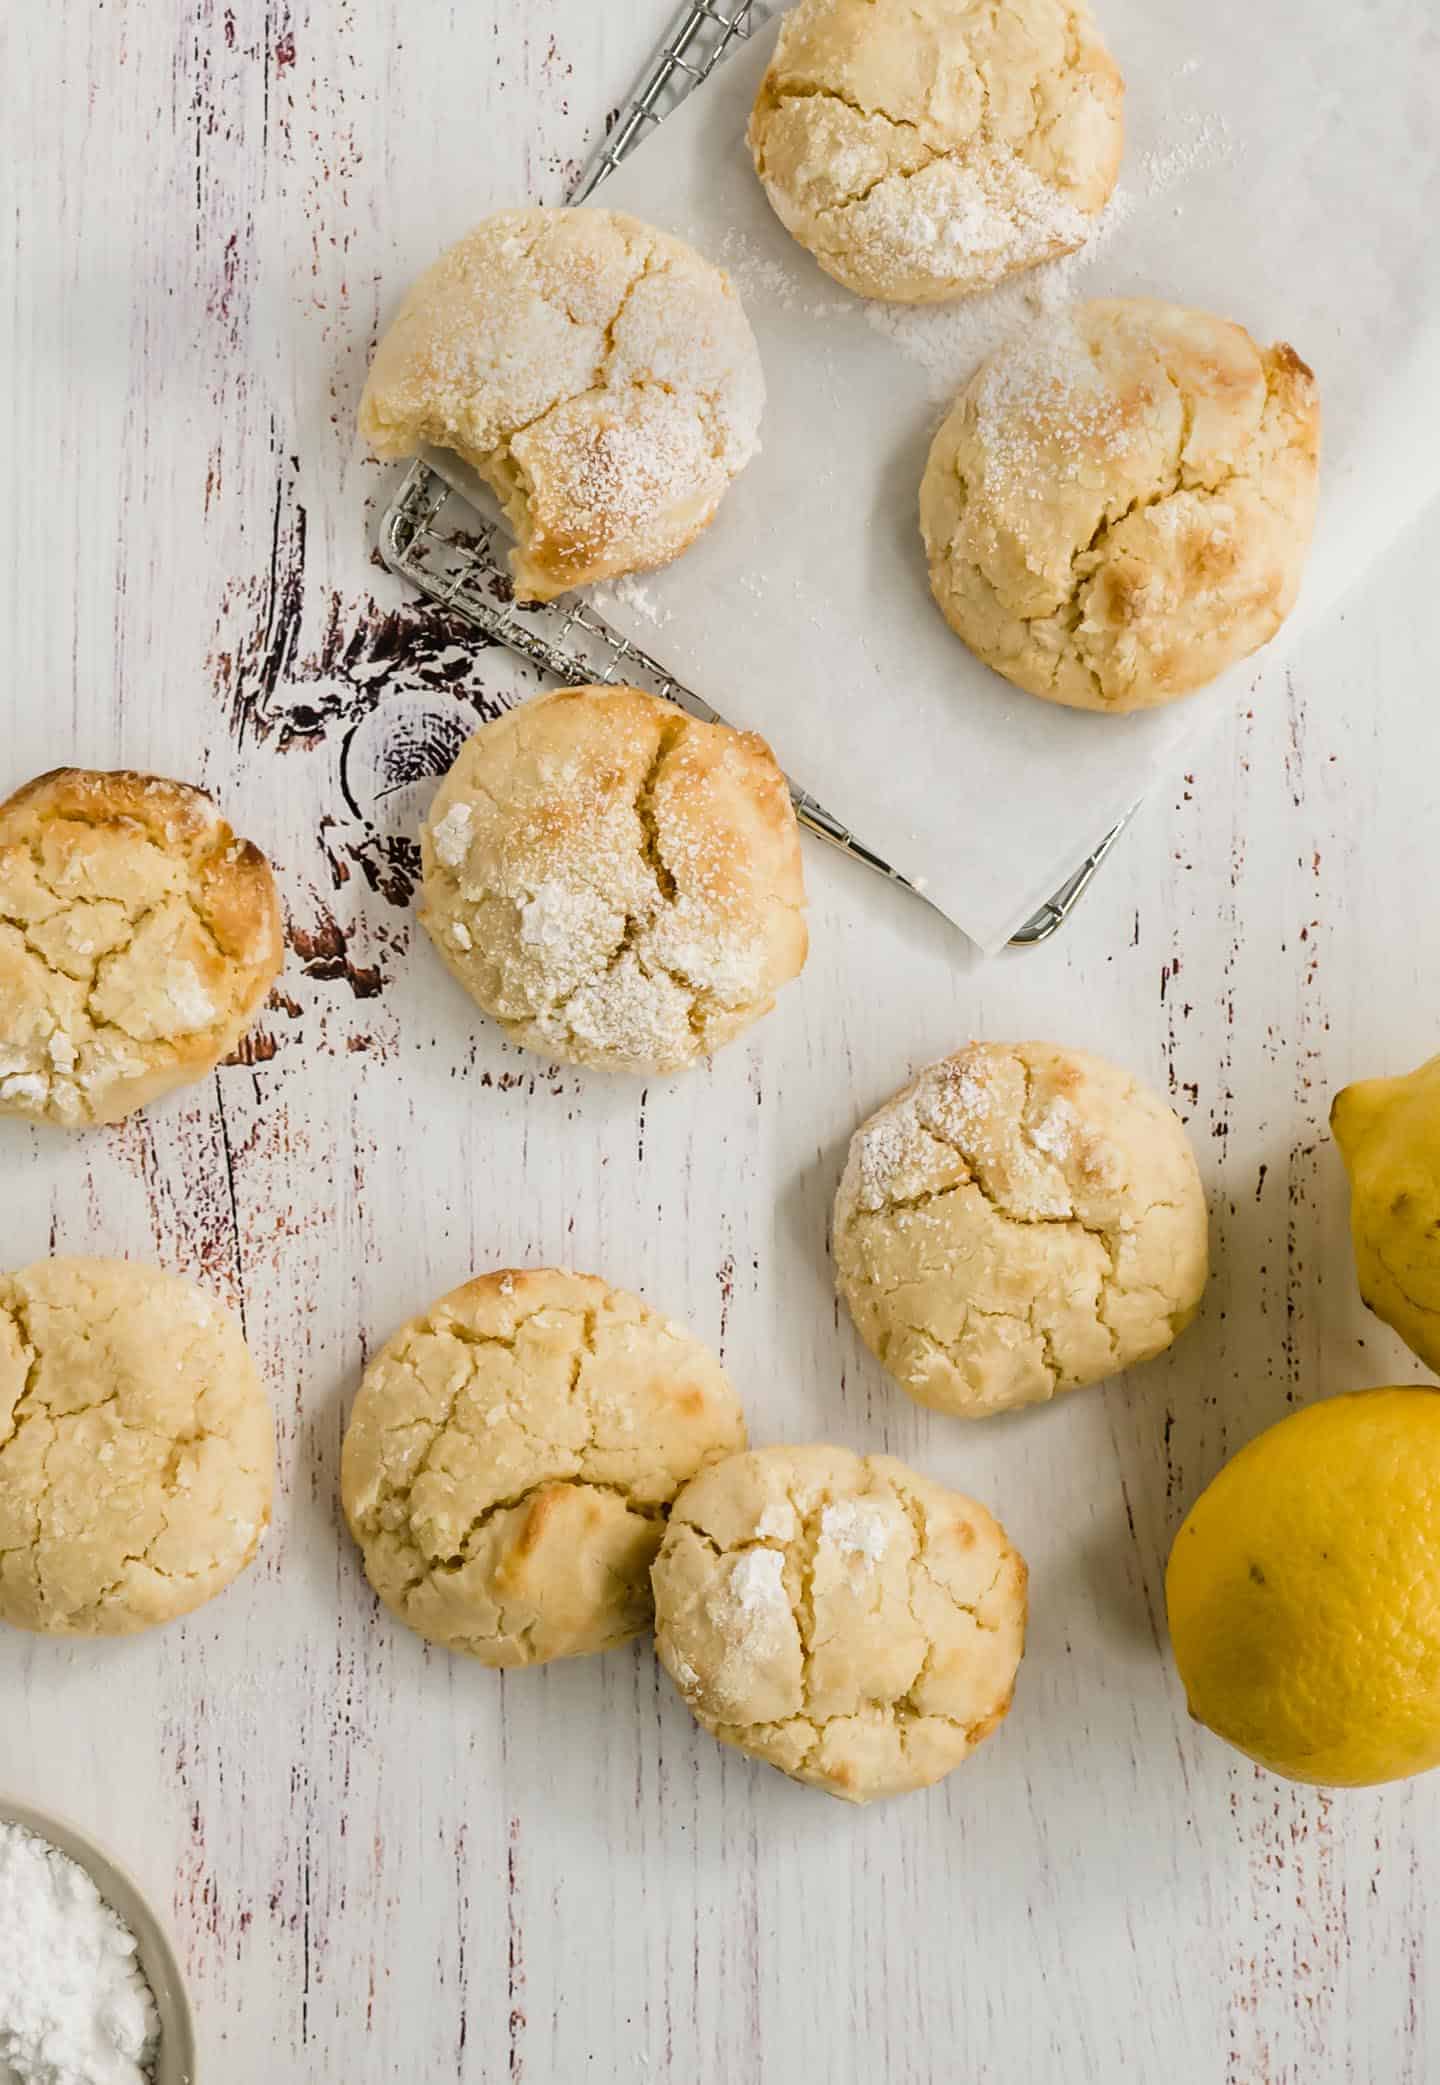 If you are into lemon, you'll love these made-from-scratch Lemon Crinkle Cookies. Chewy center and slightly crispy edges that melt in your mouth.